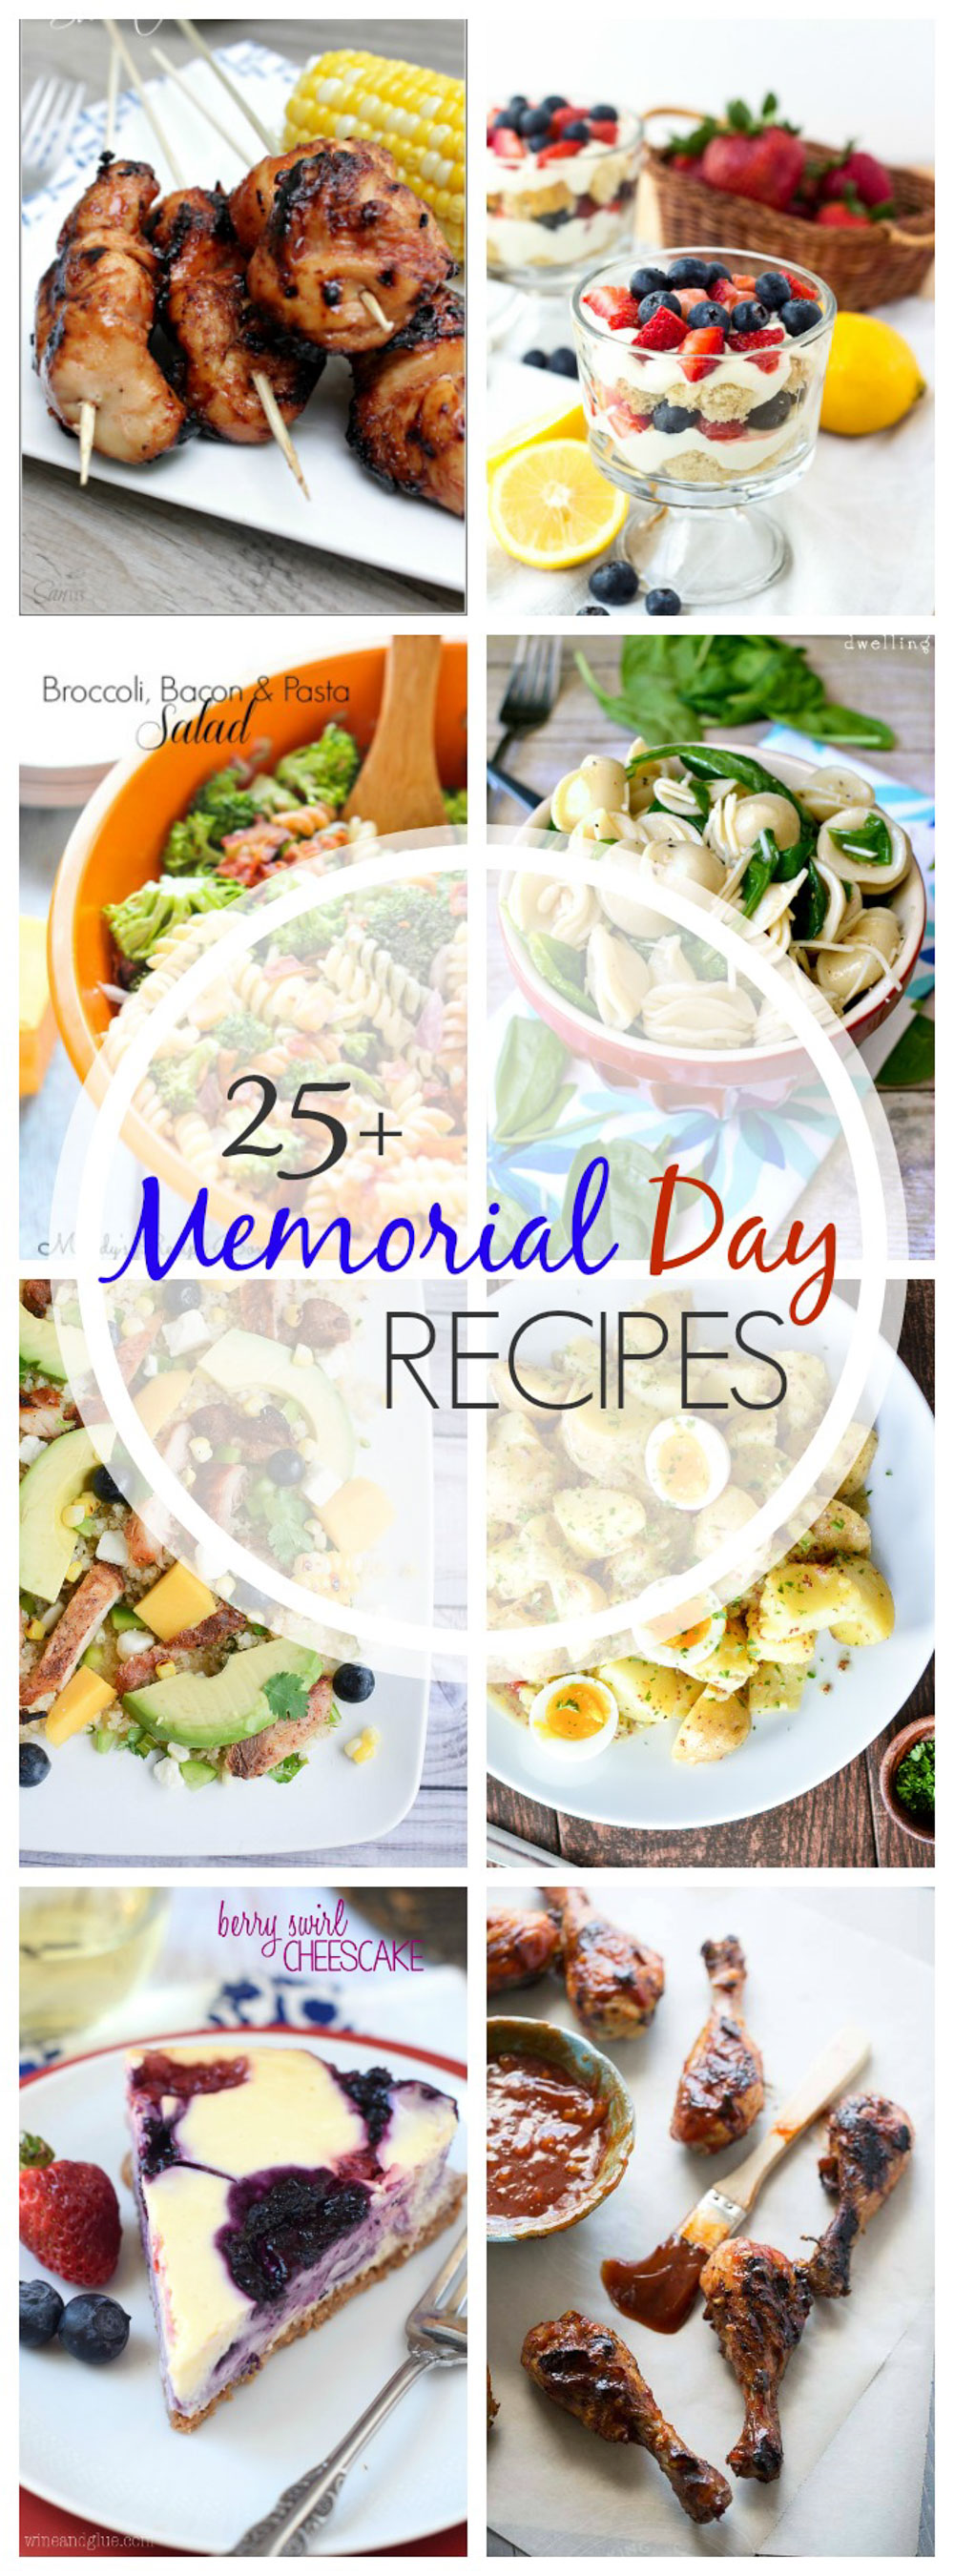 From grilled chicken to potato salad and pie to parfaits, here are 25+ Memorial Day Recipes perfect for a picnic!